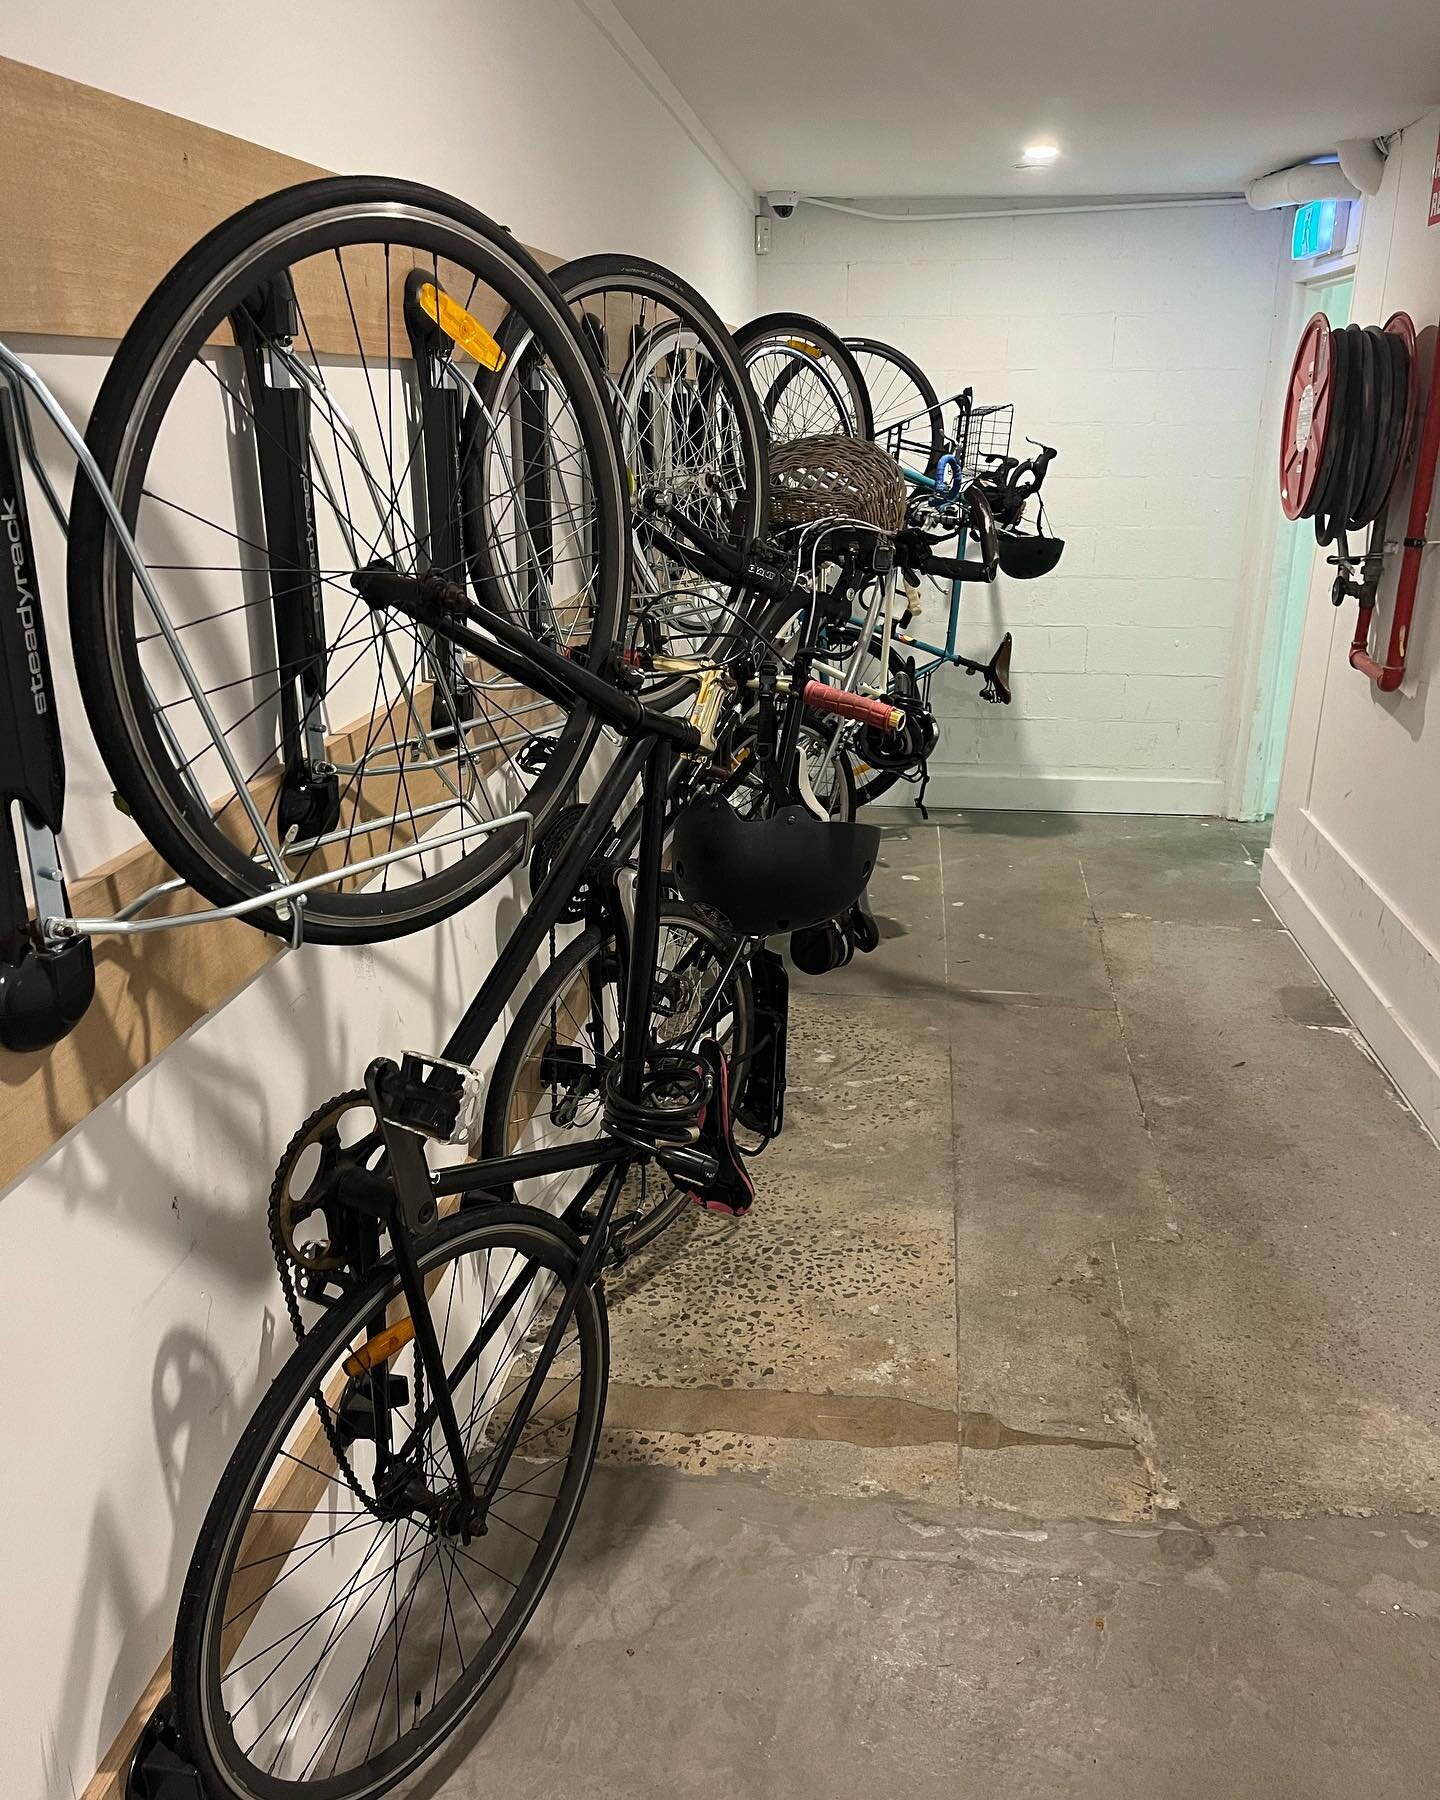 We love that even on wet and frosty #melbourne winter days so many of our eco community still cycle to work!!! &hearts;️🌏✨
.
.
.
#coworking #startups #brunswick #coworkingcommunity #climateaction